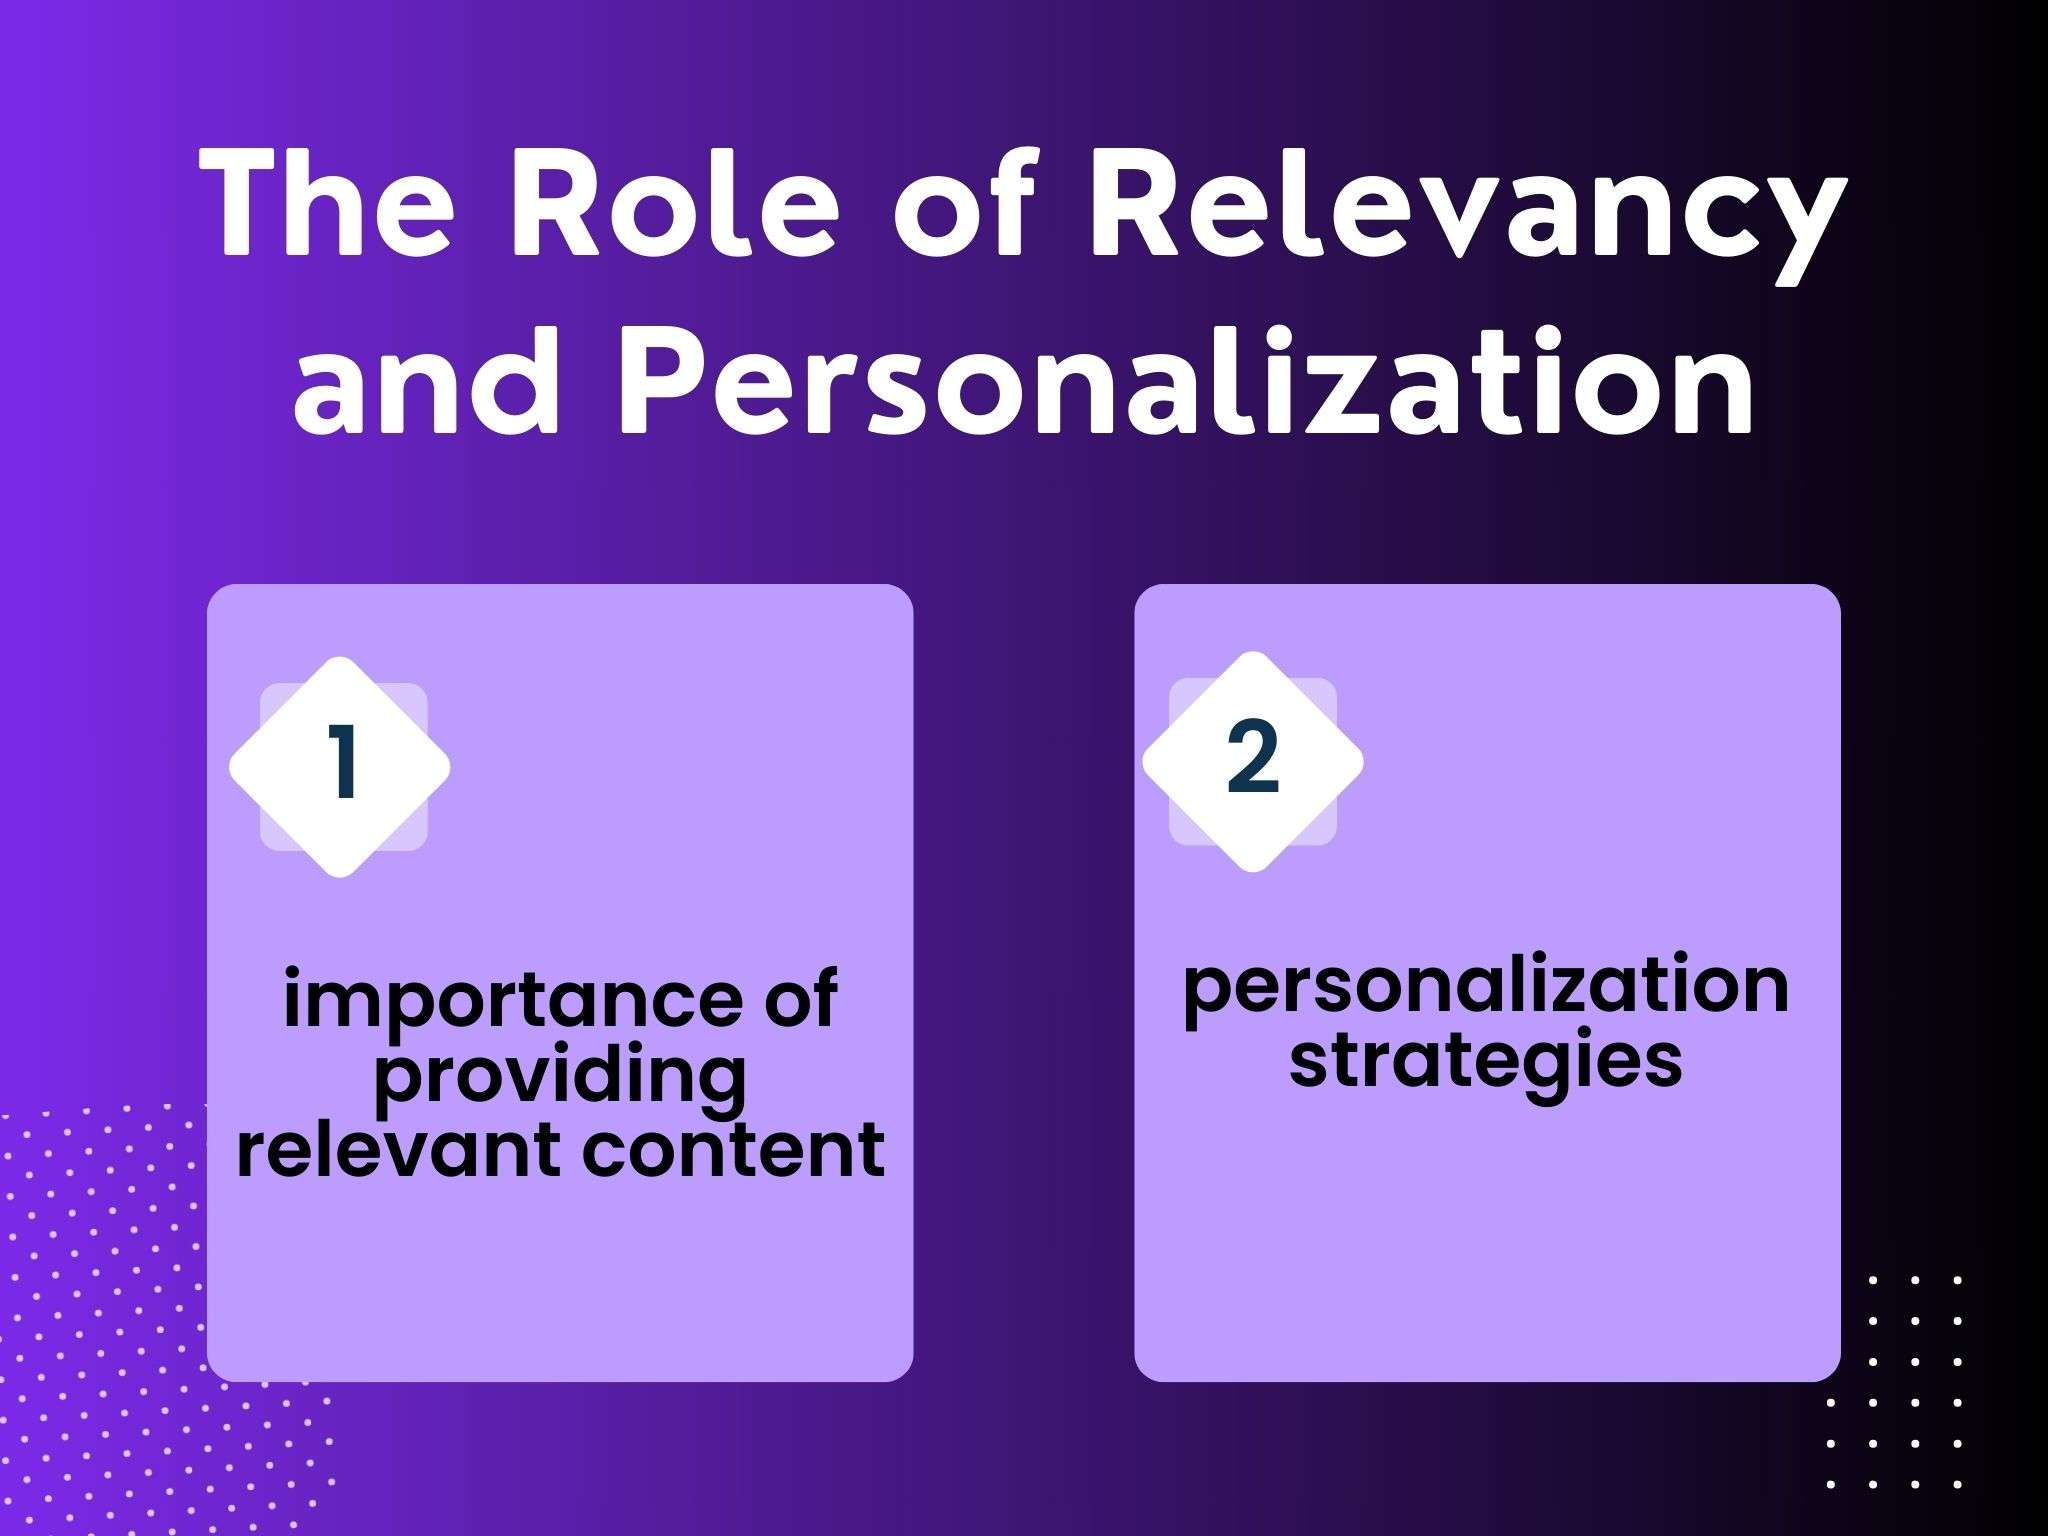 The role of relevancy and personalization